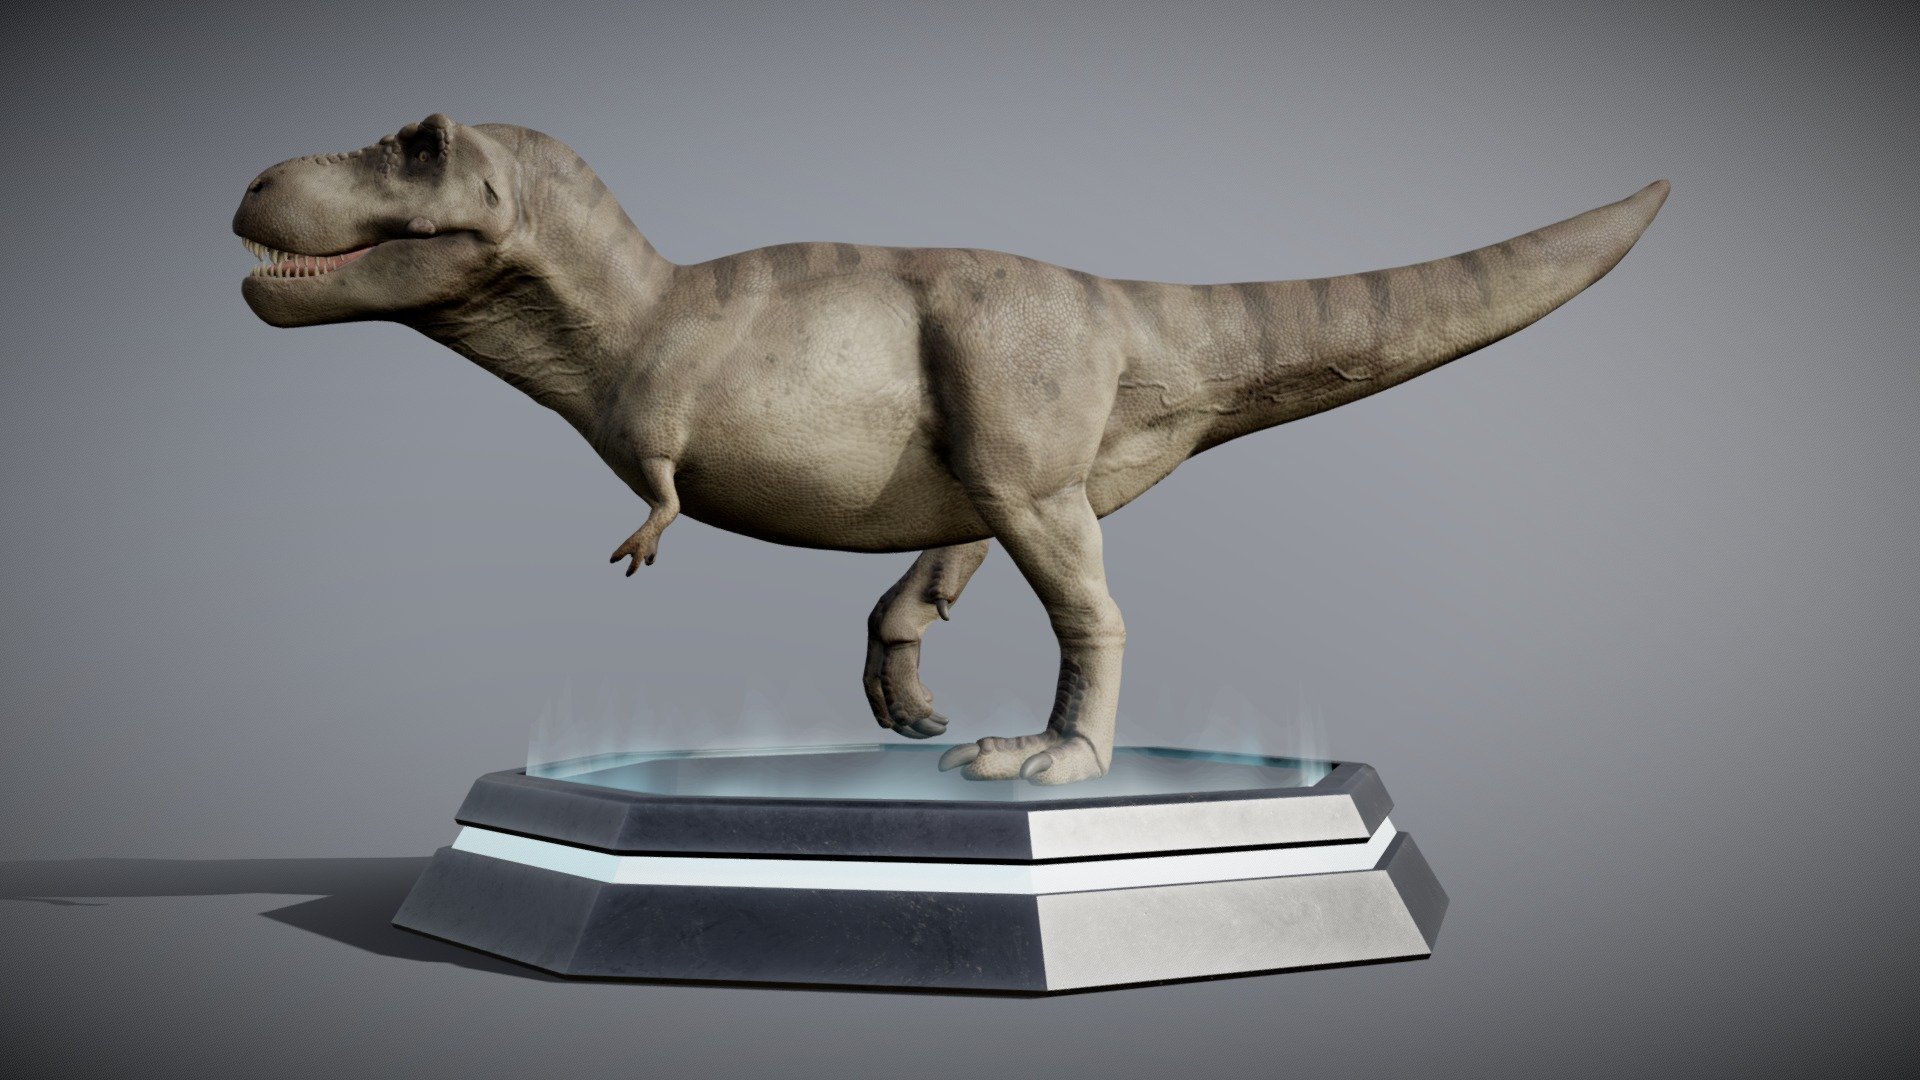 This Trex was sculpted in zbrush, textured in Substance Painter and Photoshop, rigged and animated in blender. Textures png 4096x4096.

Tyrannosaurus is a genus of large theropod dinosaur. The species Tyrannosaurus rex (rex meaning king in Latin), often called T. rex or colloquially T-Rex, is one of the best represented theropods. Tyrannosaurus lived throughout what is now western North America, on what was then an island continent known as Laramidia. Tyrannosaurus had a much wider range than other tyrannosaurids. Fossils are found in a variety of rock formations dating to the Maastrichtian age of the Upper Cretaceous period, 68 to 66 million years ago. It was the last known member of the tyrannosaurids and among the last non-avian dinosaurs to exist before the Cretaceous–Paleogene extinction event 3d model